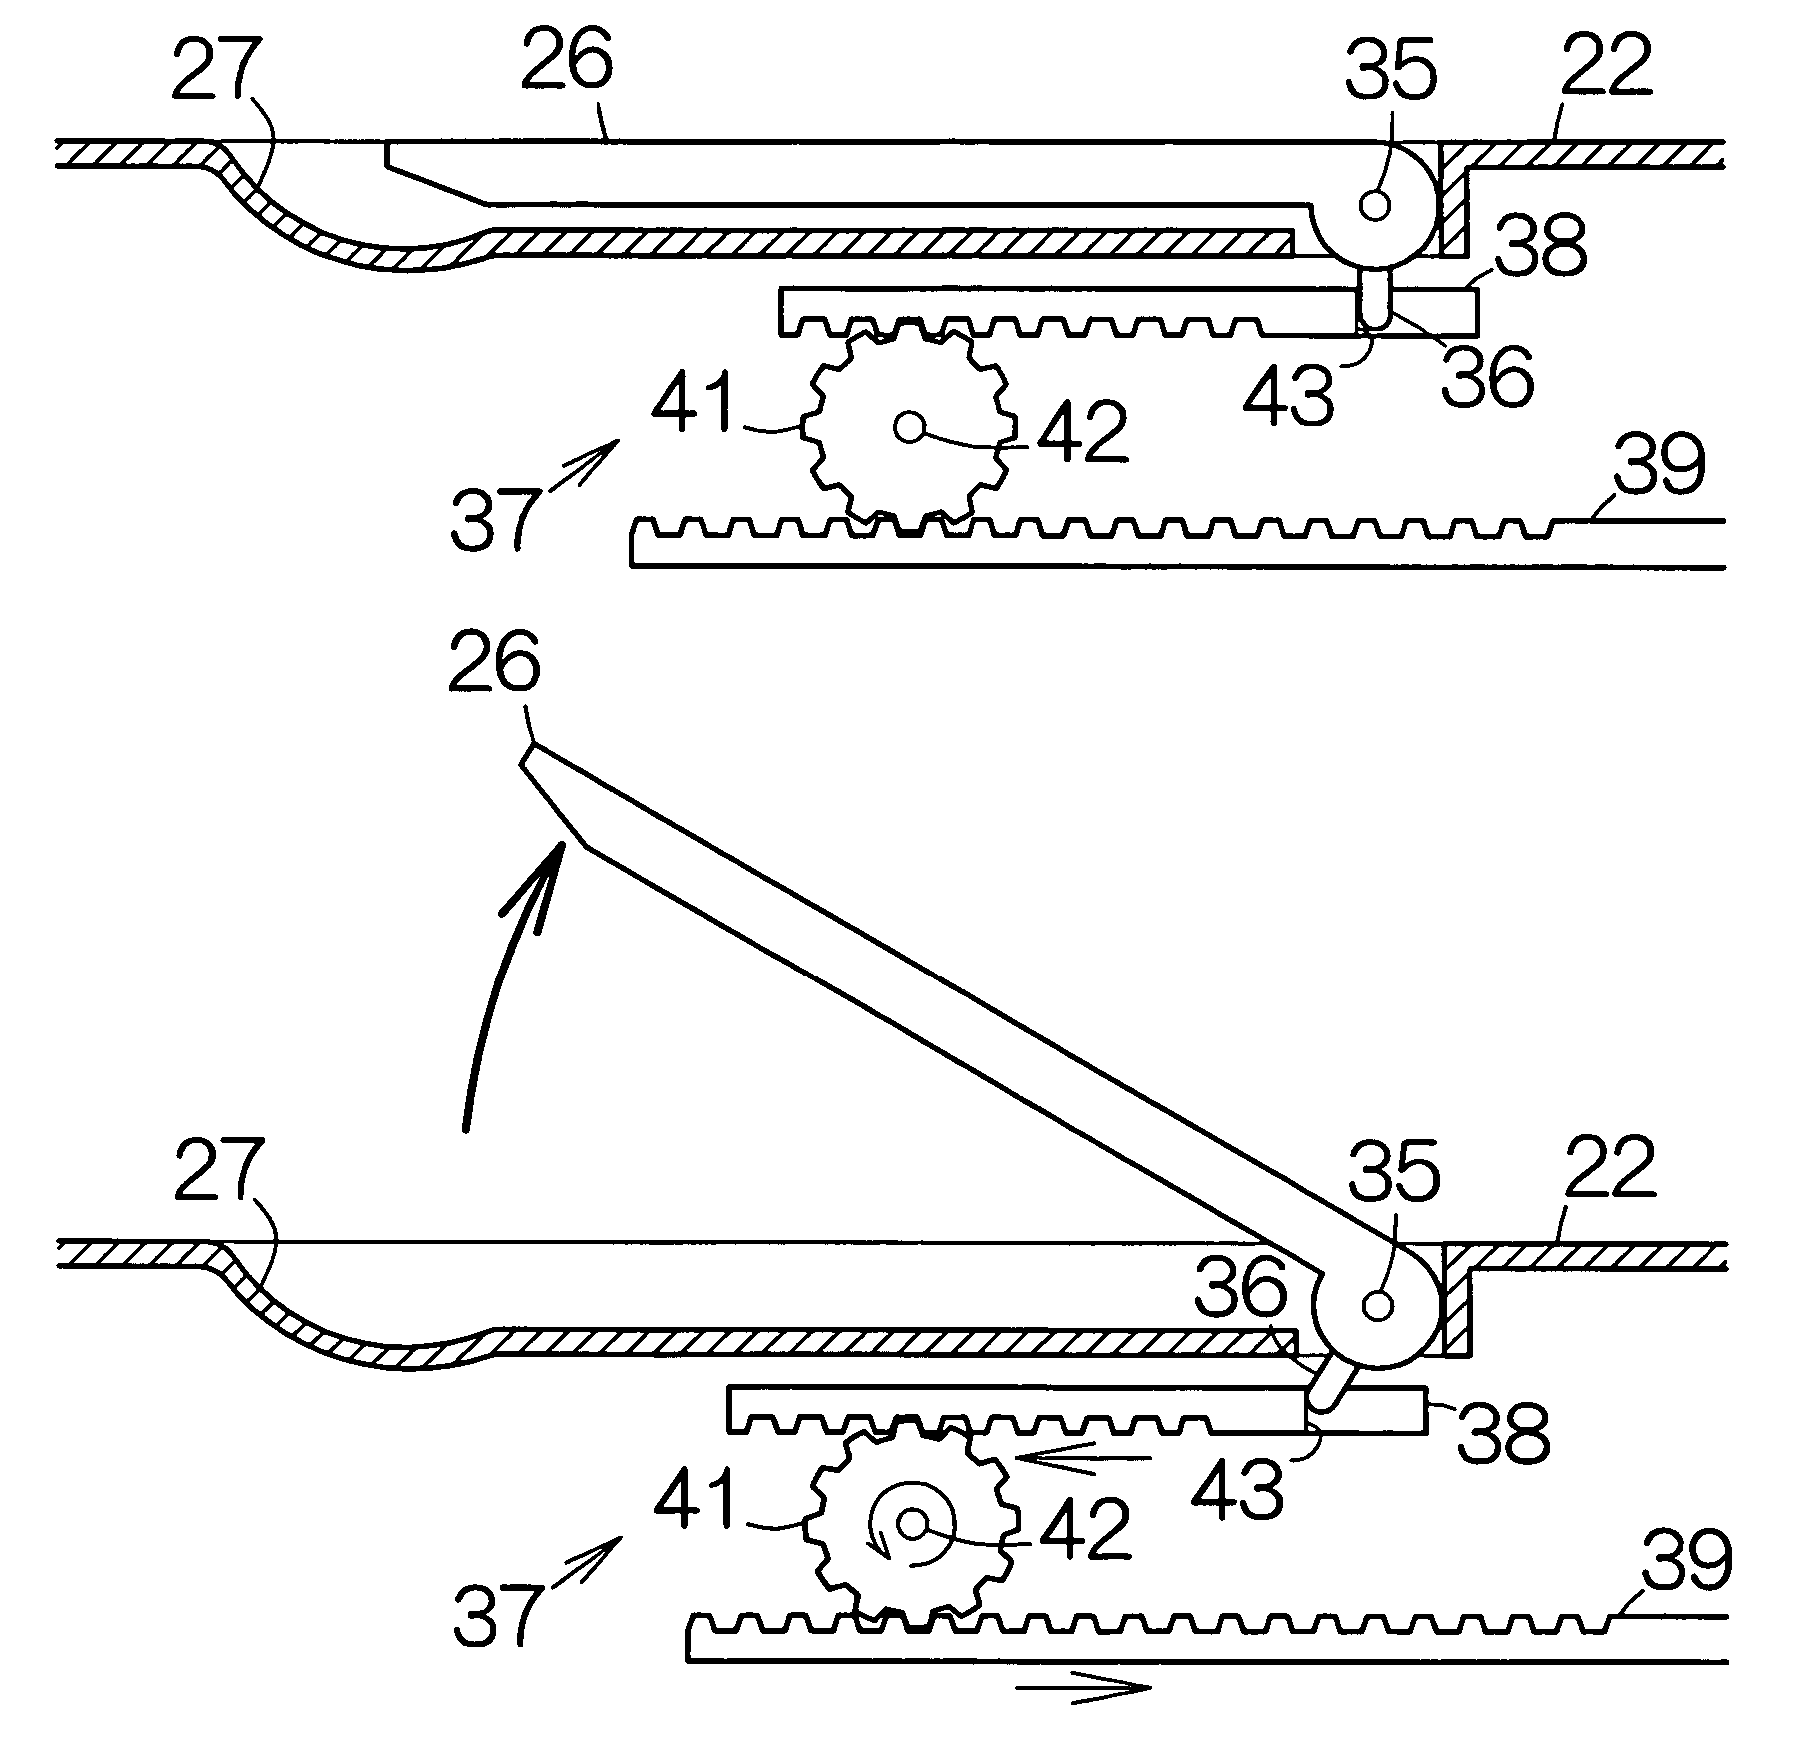 Electronic apparatus and enclosure